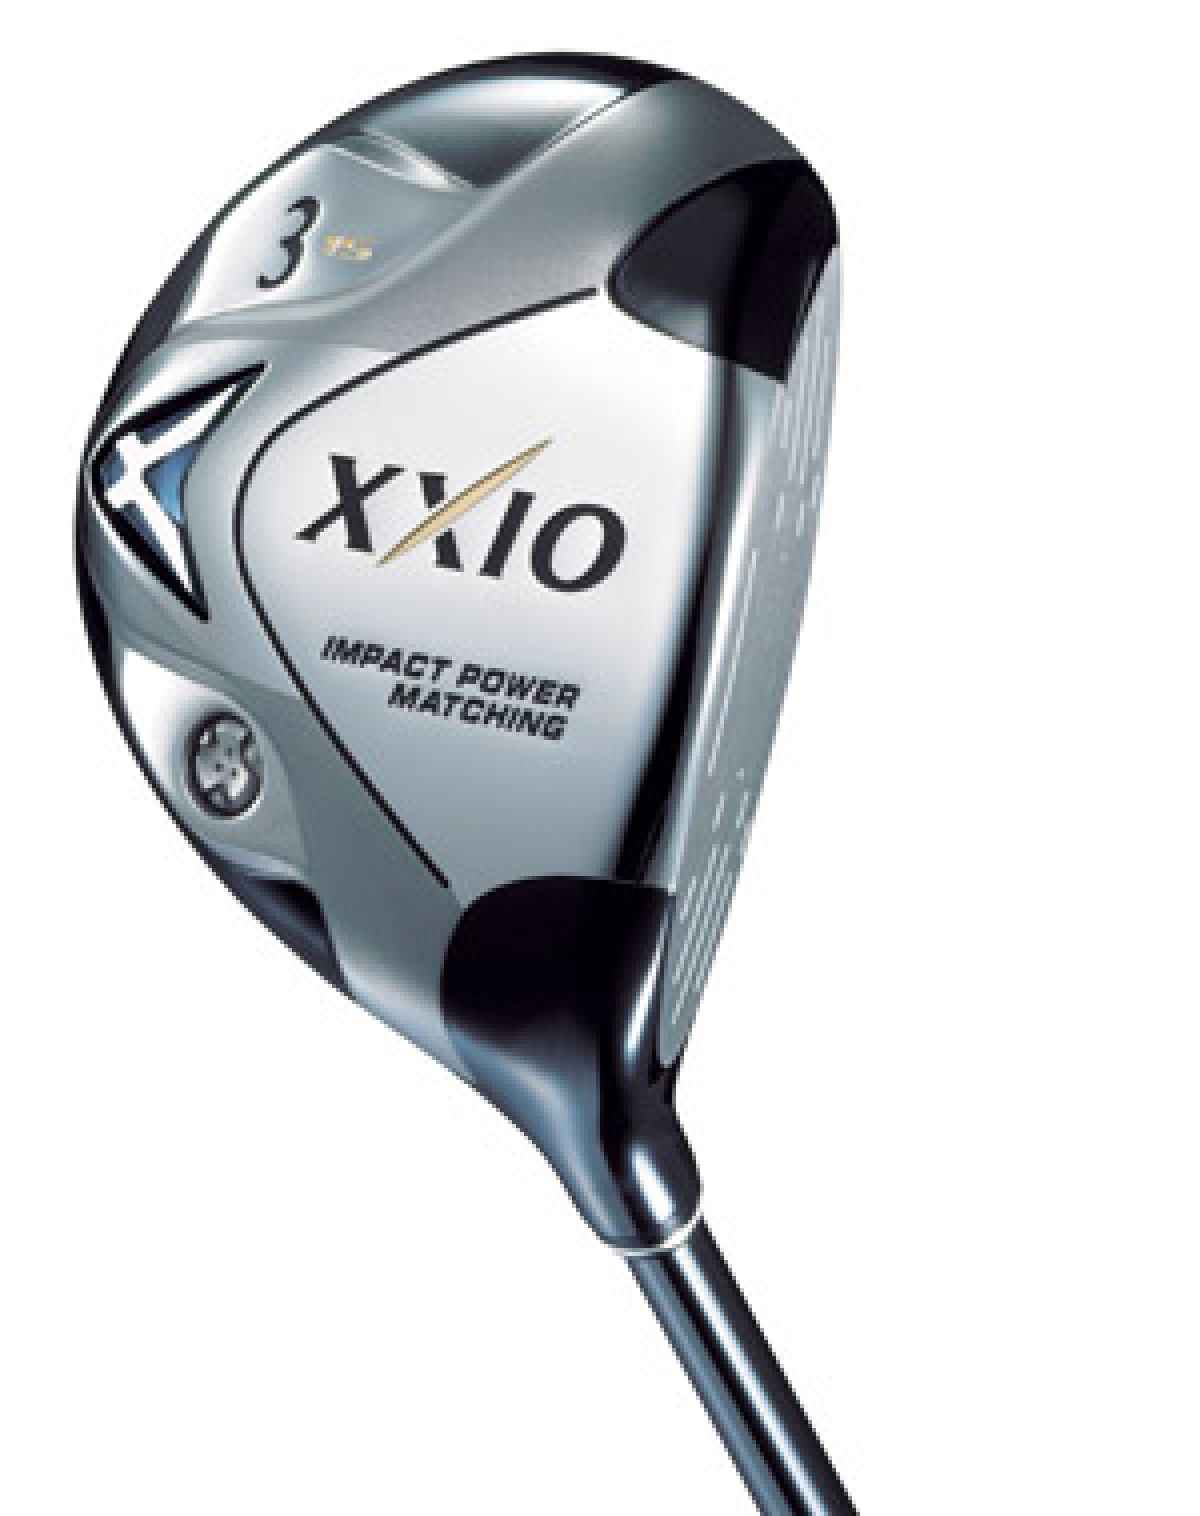 March launch of Srixon XX10 clubs